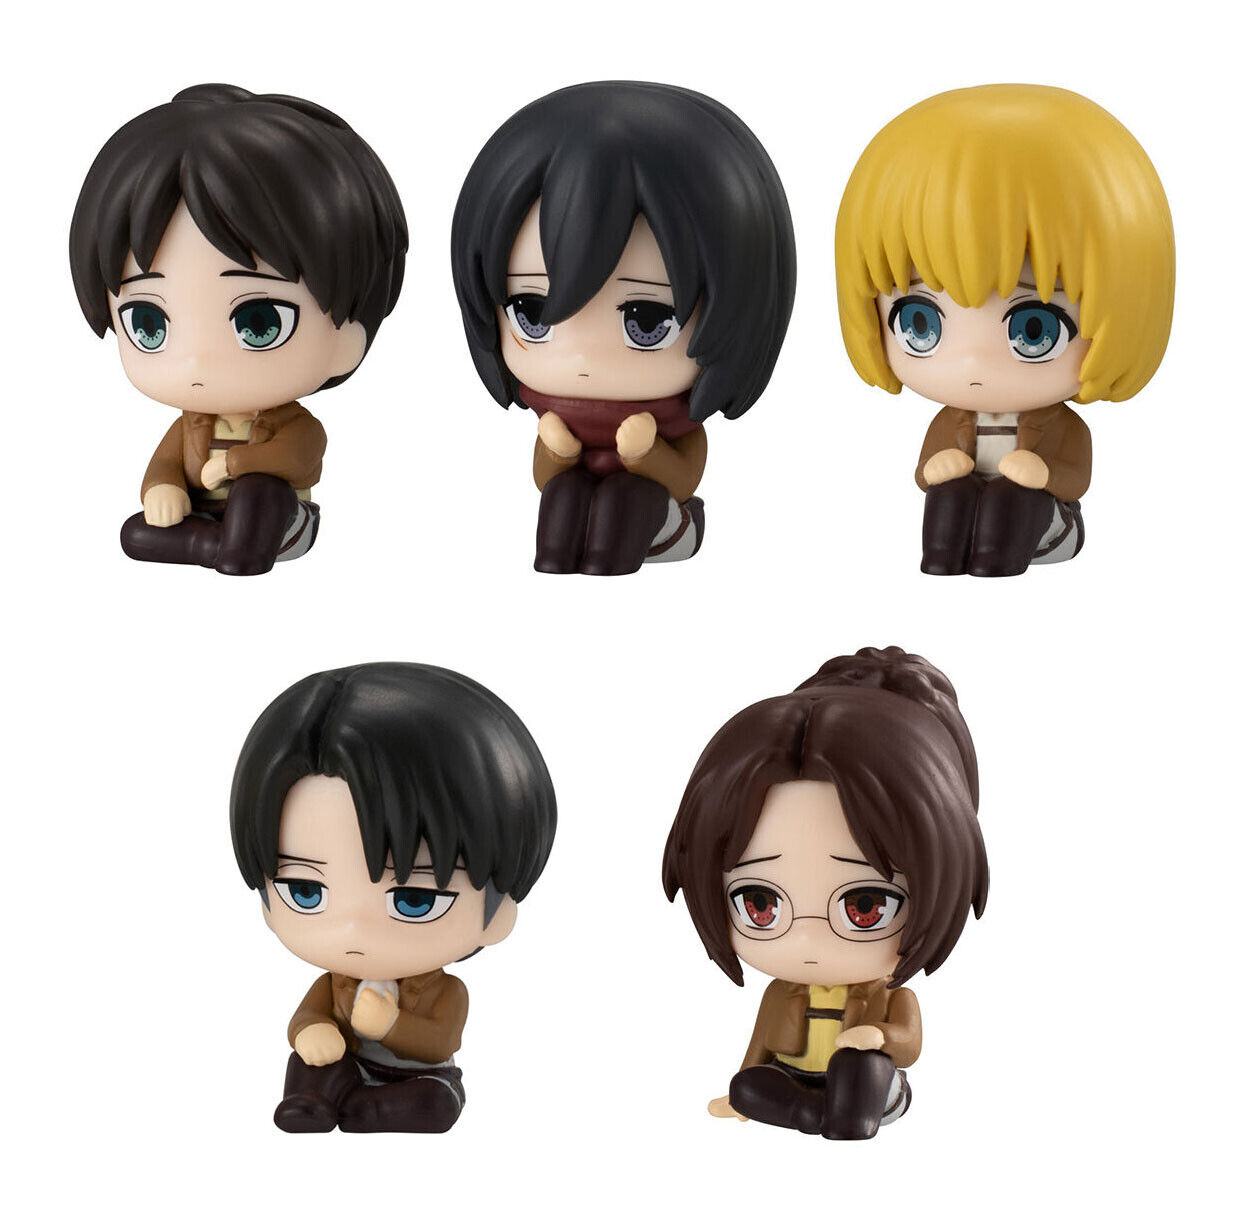 Attack on Titan Still Waiting for You Figure 10th Anniversary Bandai set of 5